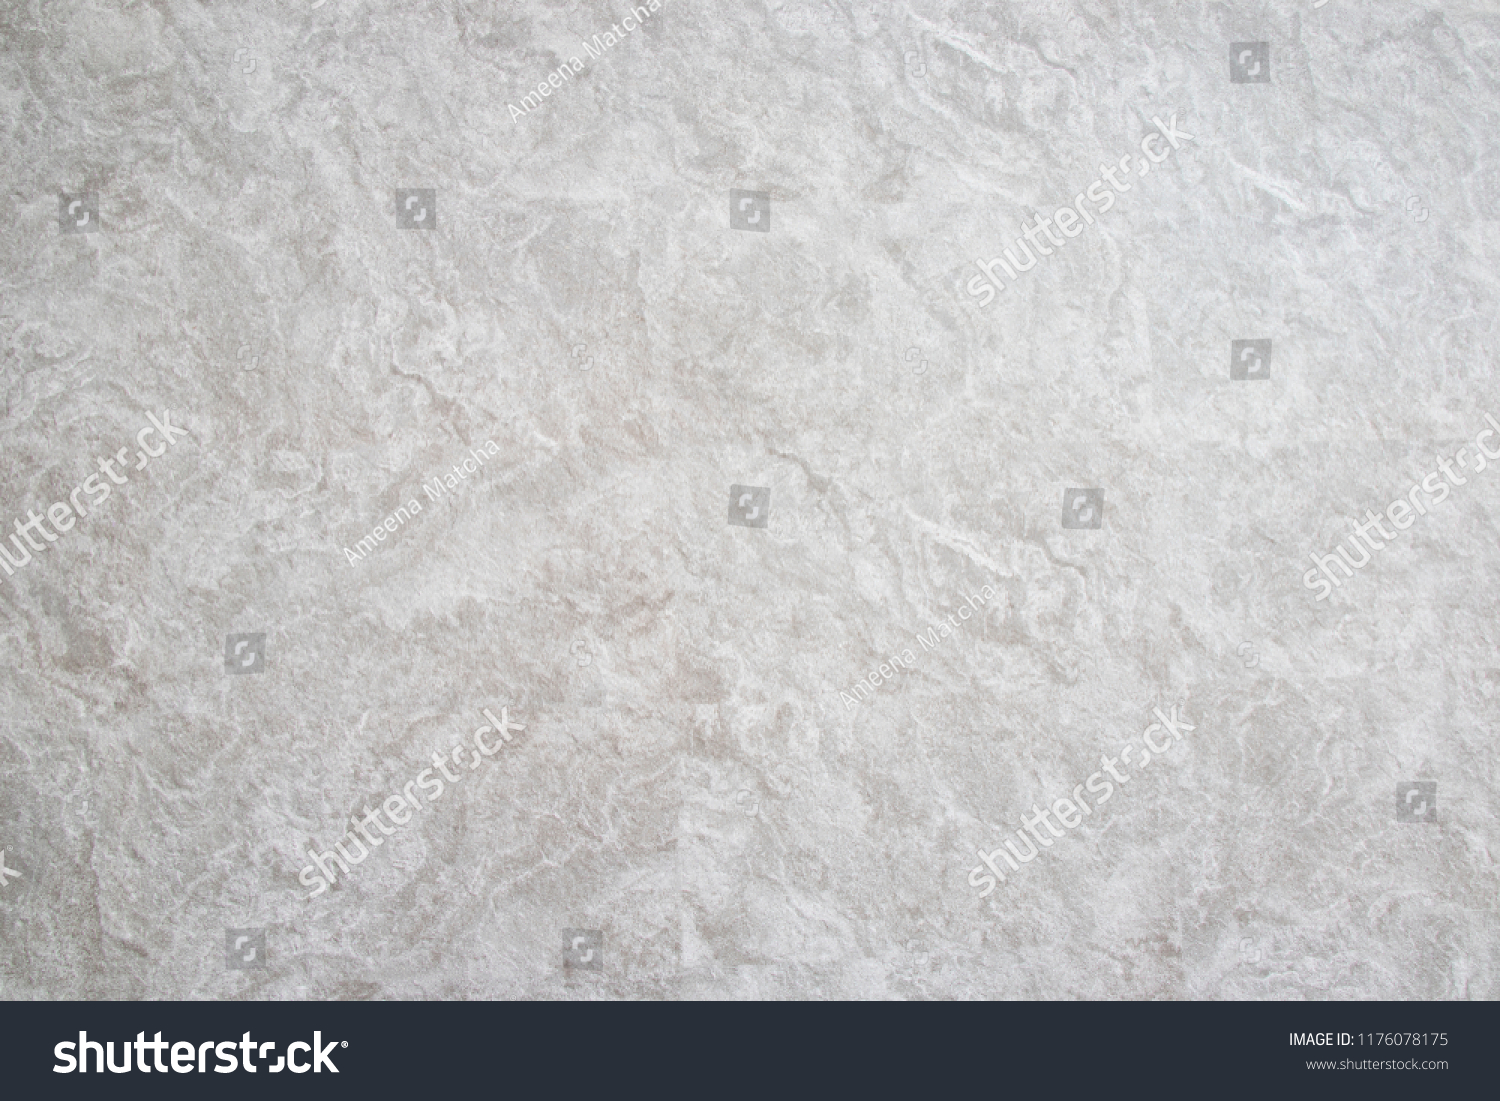 Polished Concrete Texture Background Stock Photo 1176078175 | Shutterstock